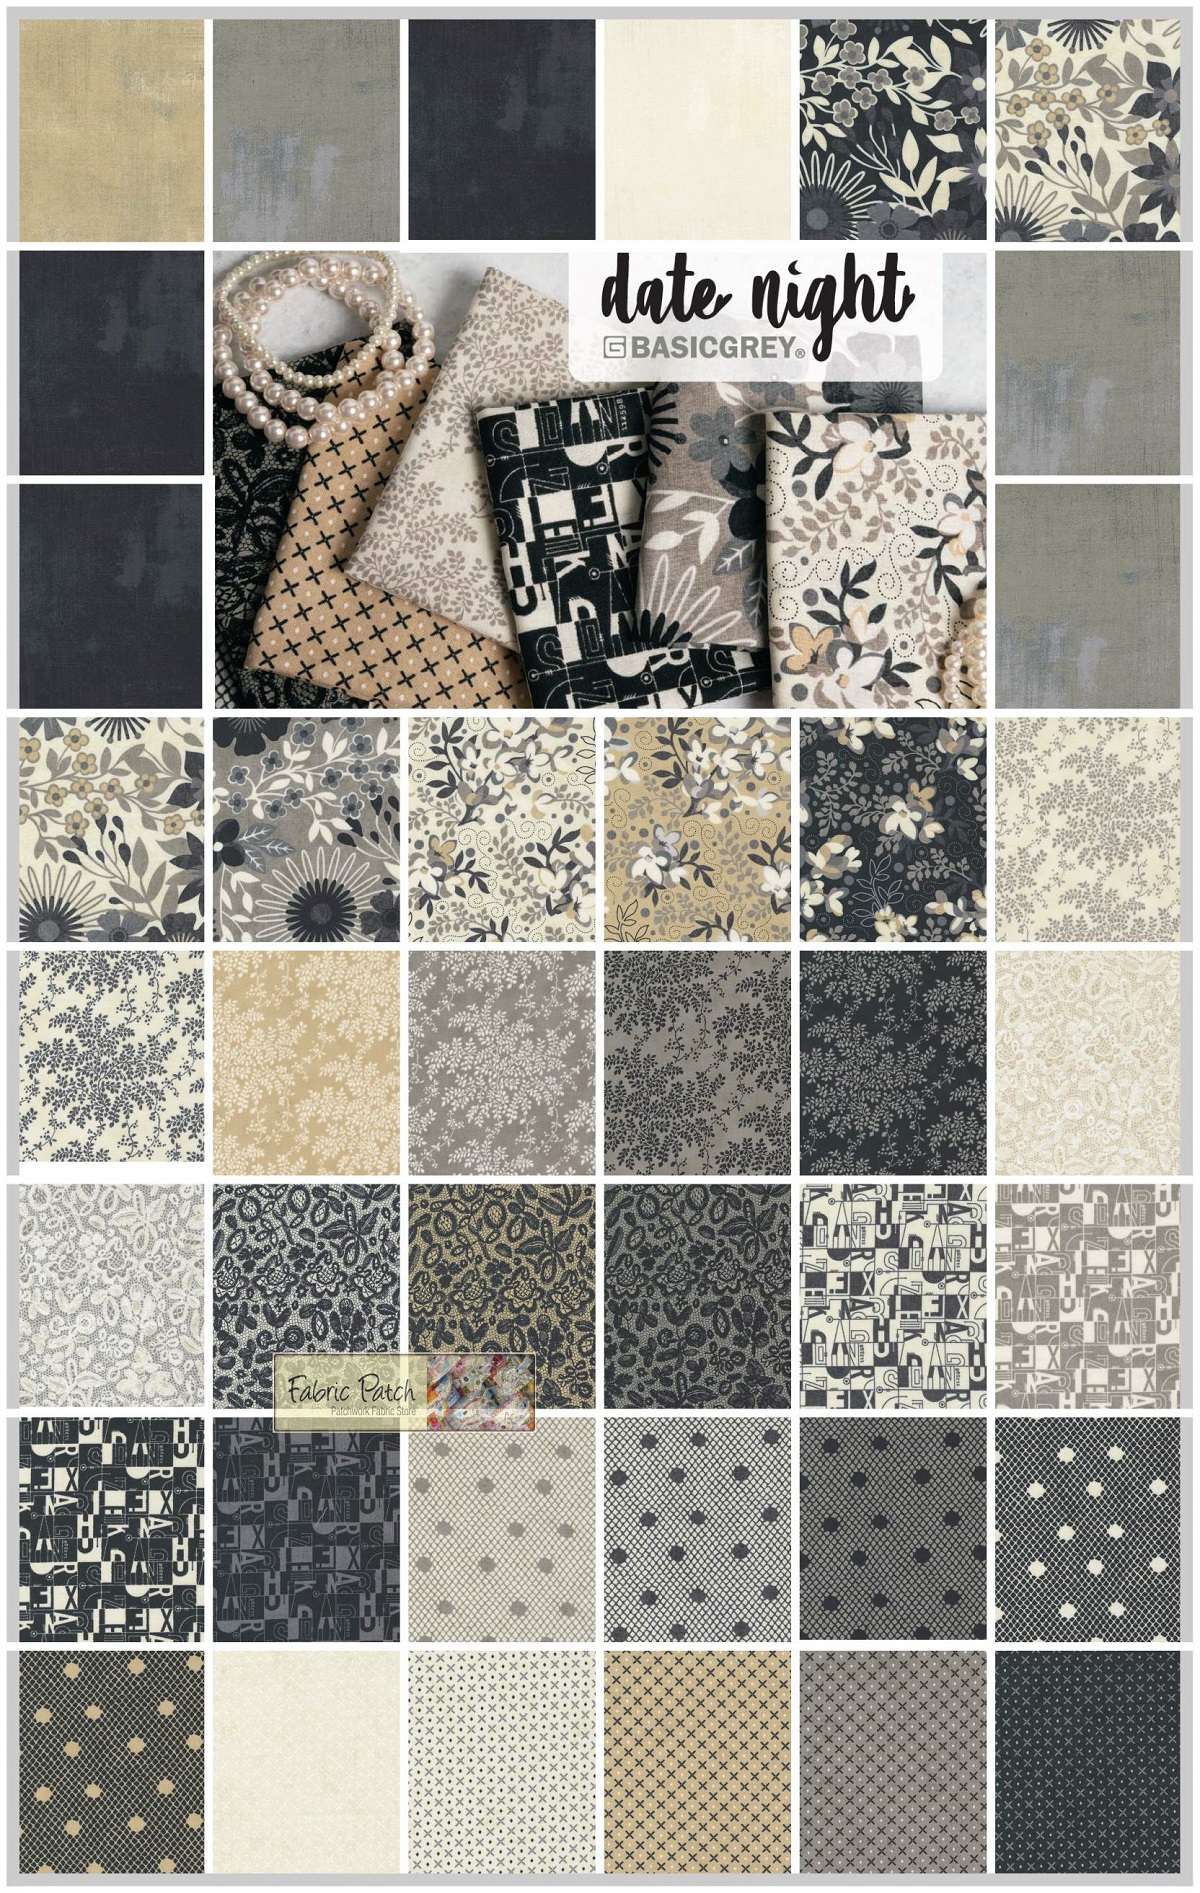 Date Night Fabric Collection by Basic Grey for Moda Fabrics